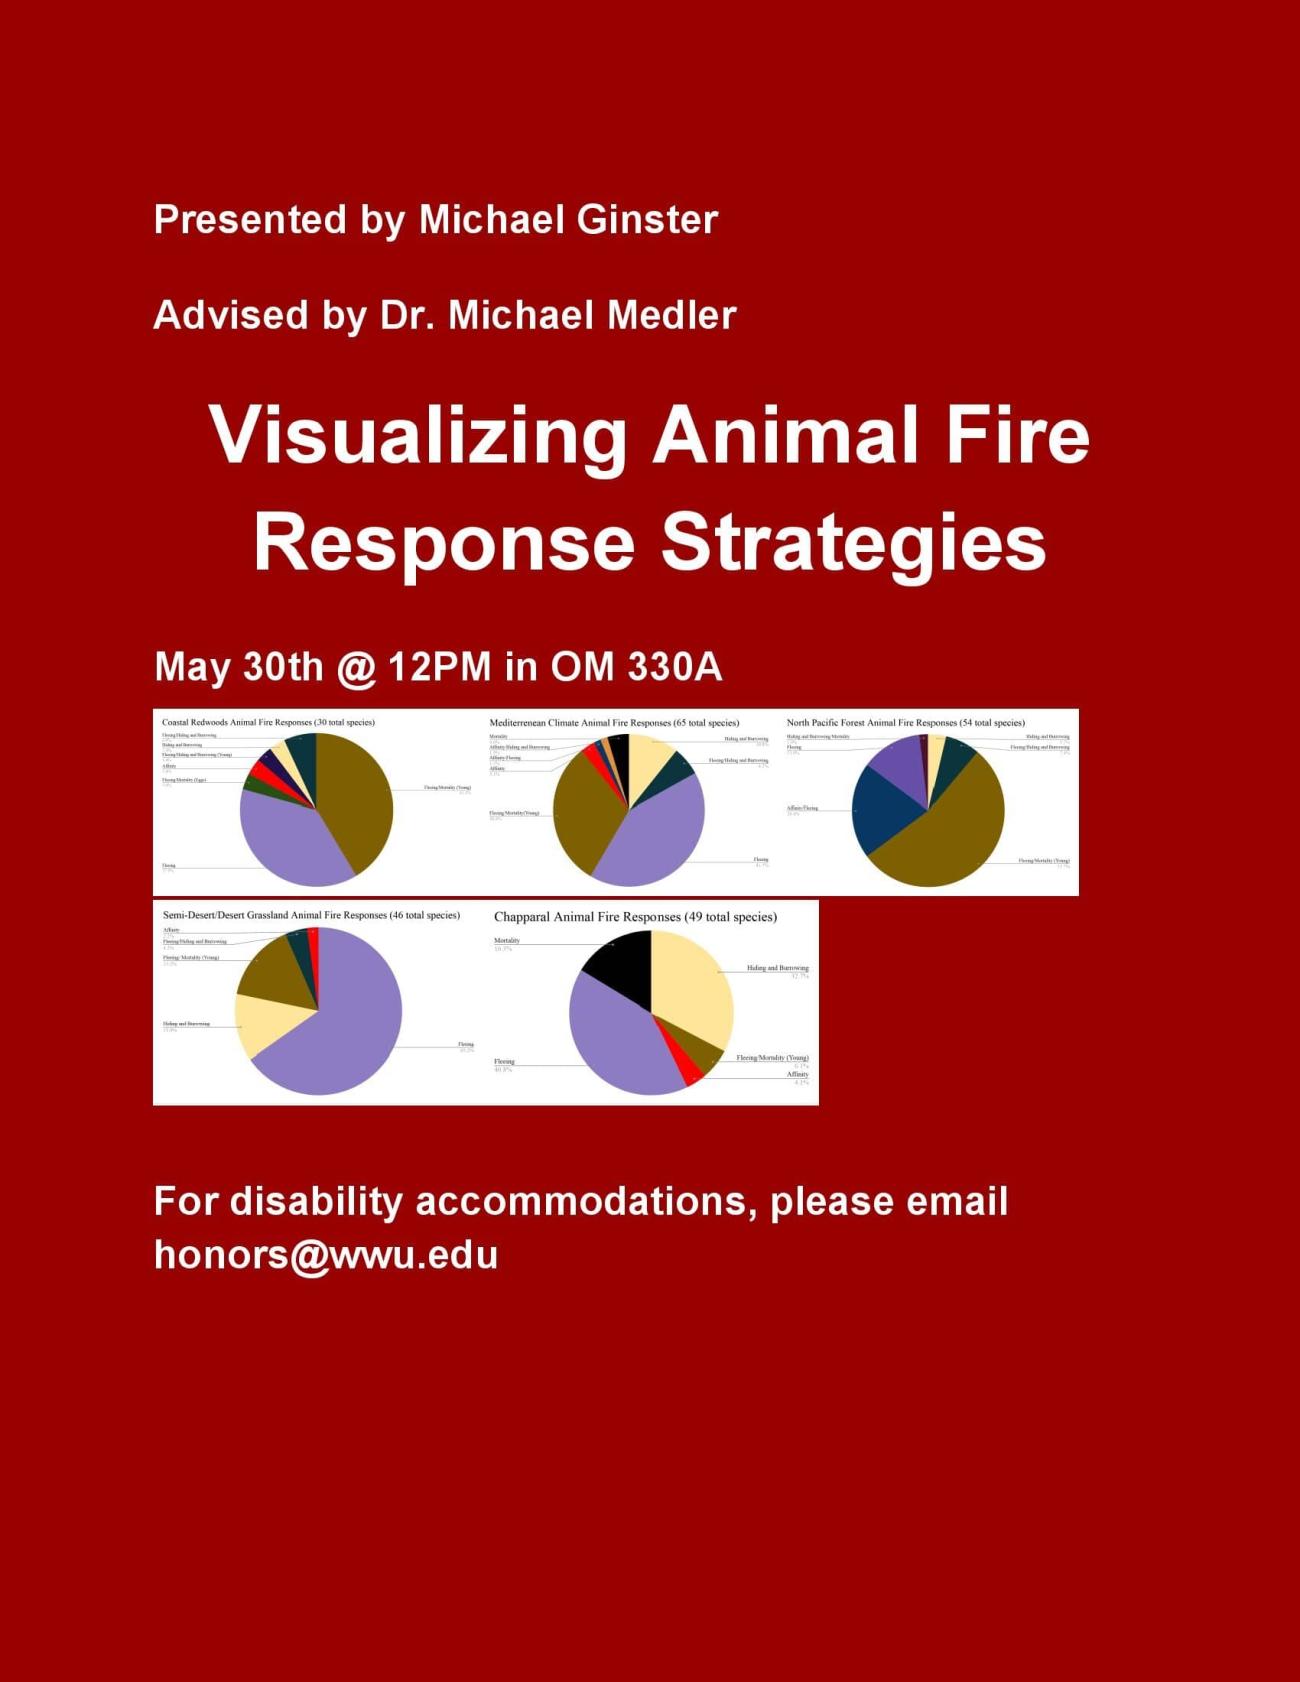 Red background containing multiple lines of text and several pie chart images. Going from top to bottom, the text reads: “Presented by Michael Ginster. Advised by Dr. Michael Medler. Visualizing Animal Fire Responses. May 31st, 2023 at 12PM in OM330A.” In the final sentence, “at” is stylized as “@”. Below this text are five pie charts. Below these charts reads a final line of text: “For disability accommodations, please email honors@wwu.edu”